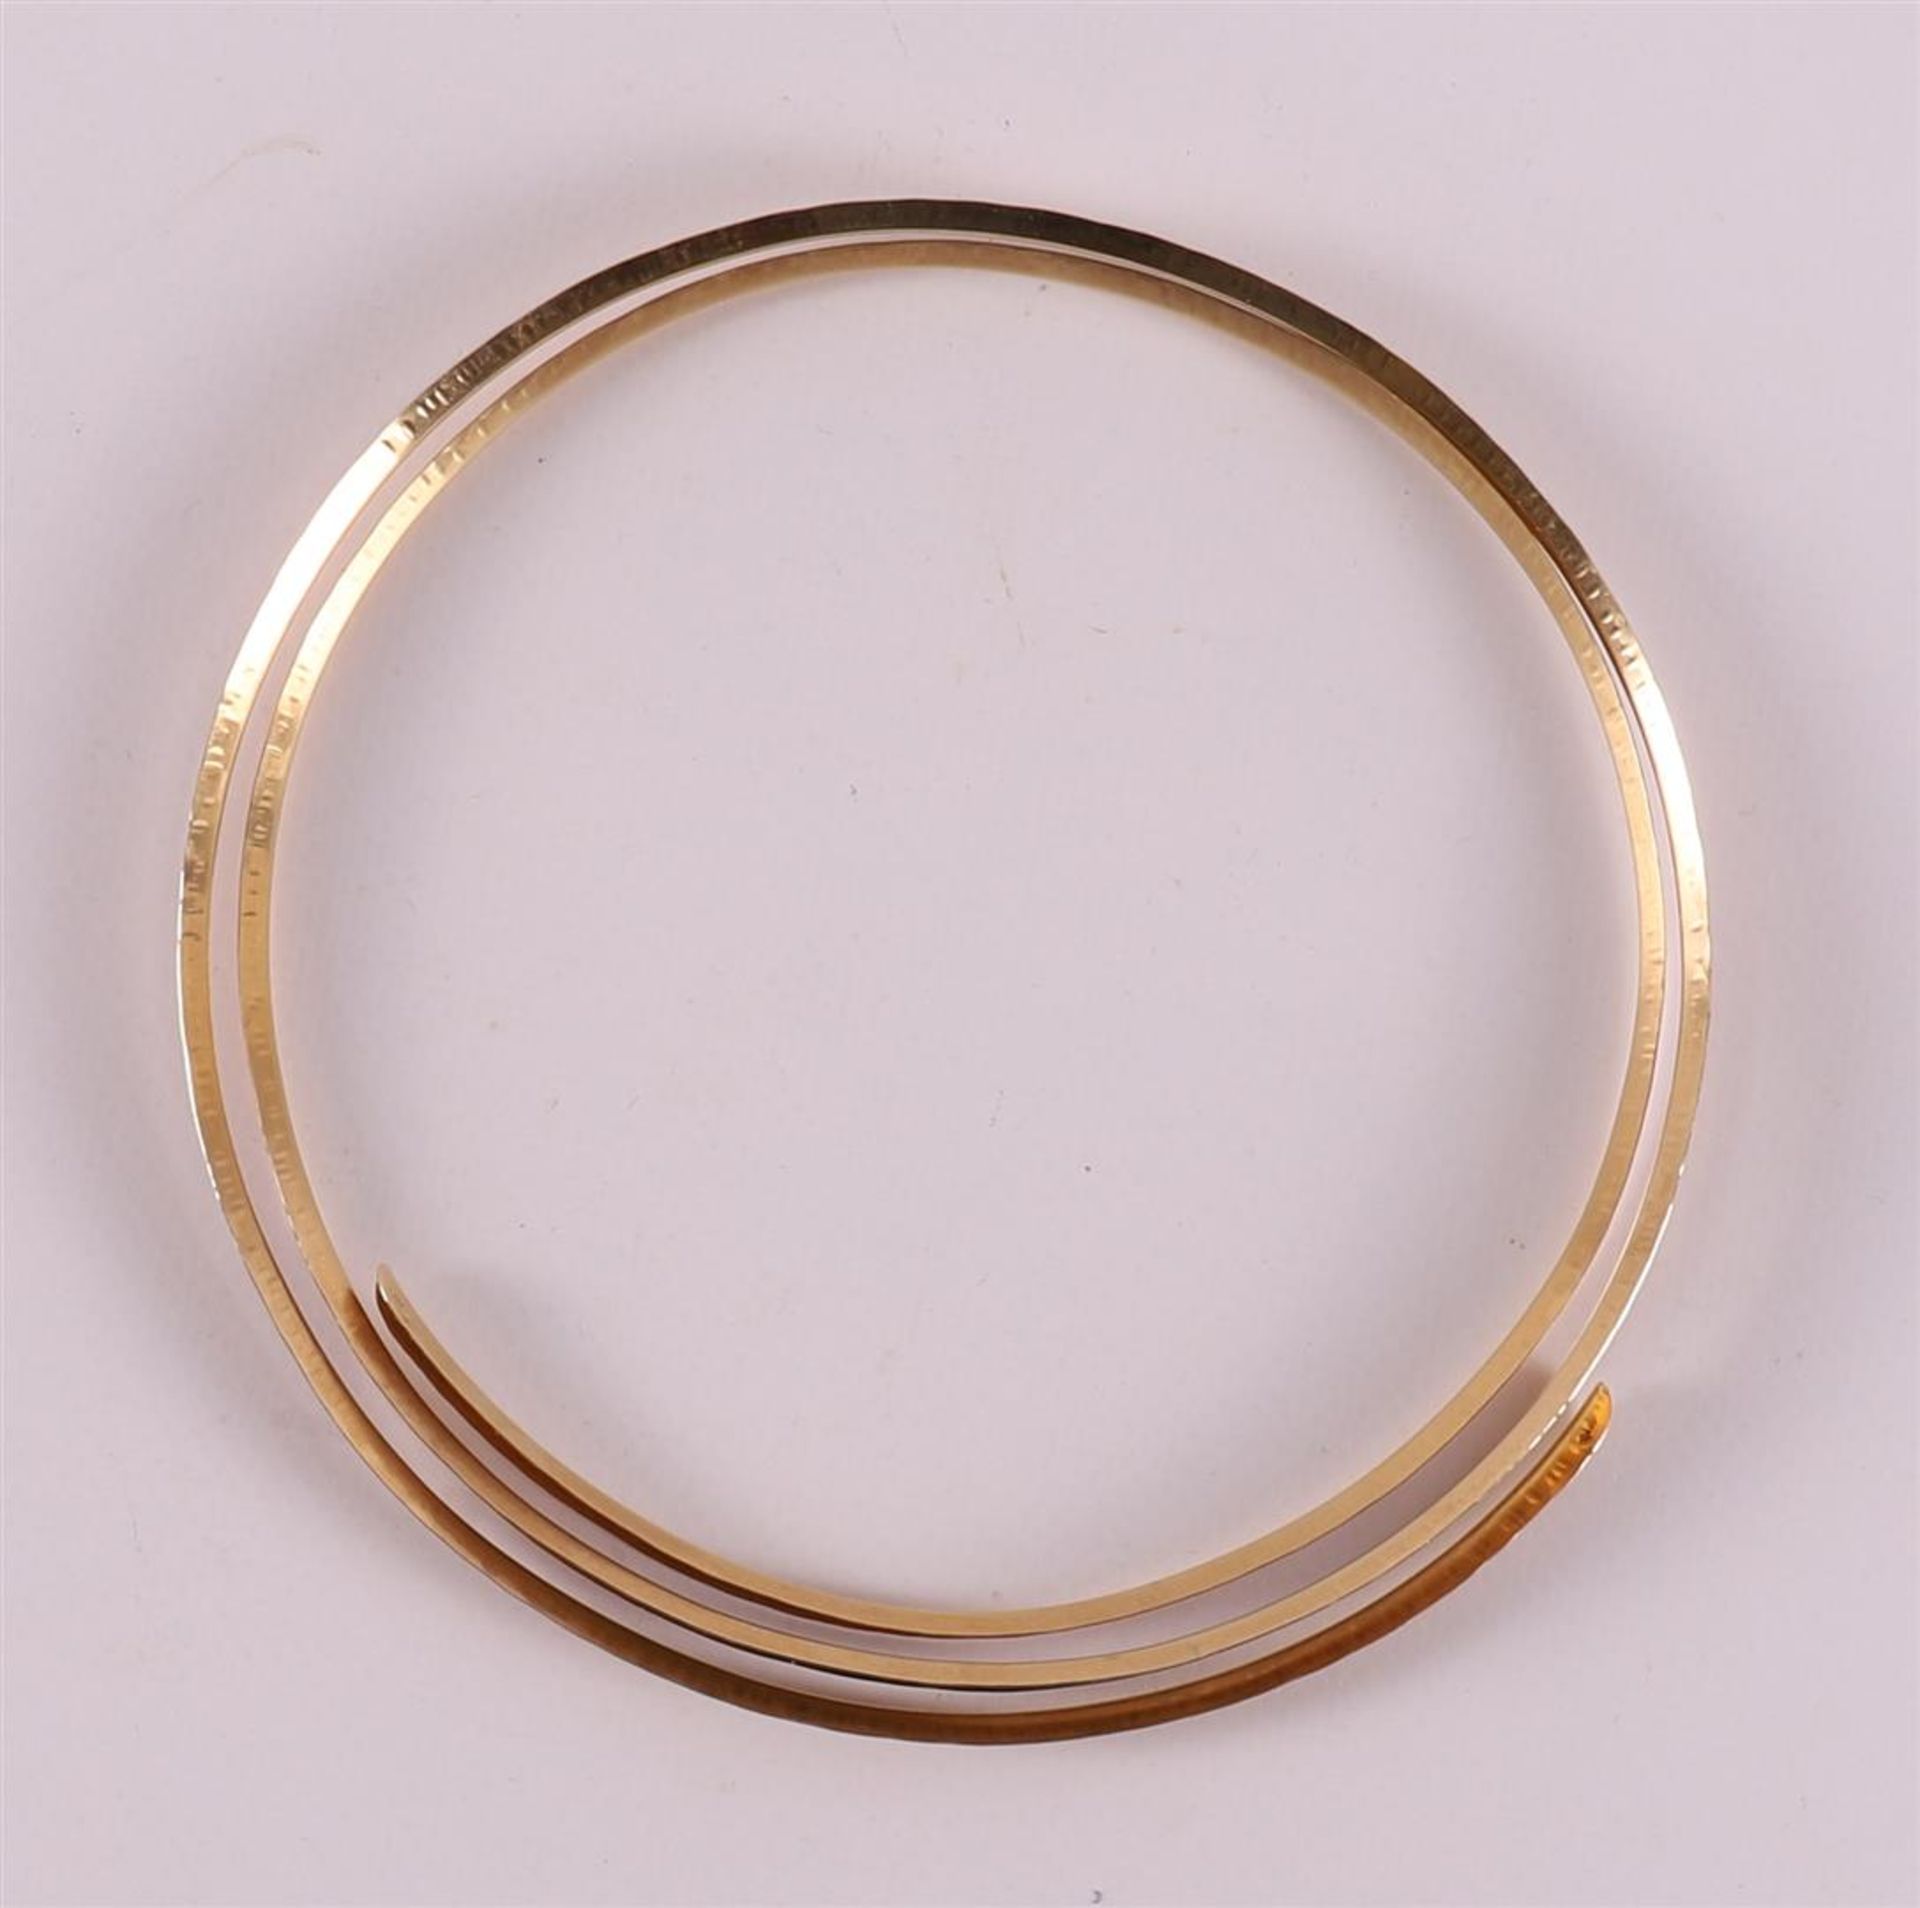 A round spiral matted 14 kt 585/1000 yellow gold choker. - Image 4 of 4